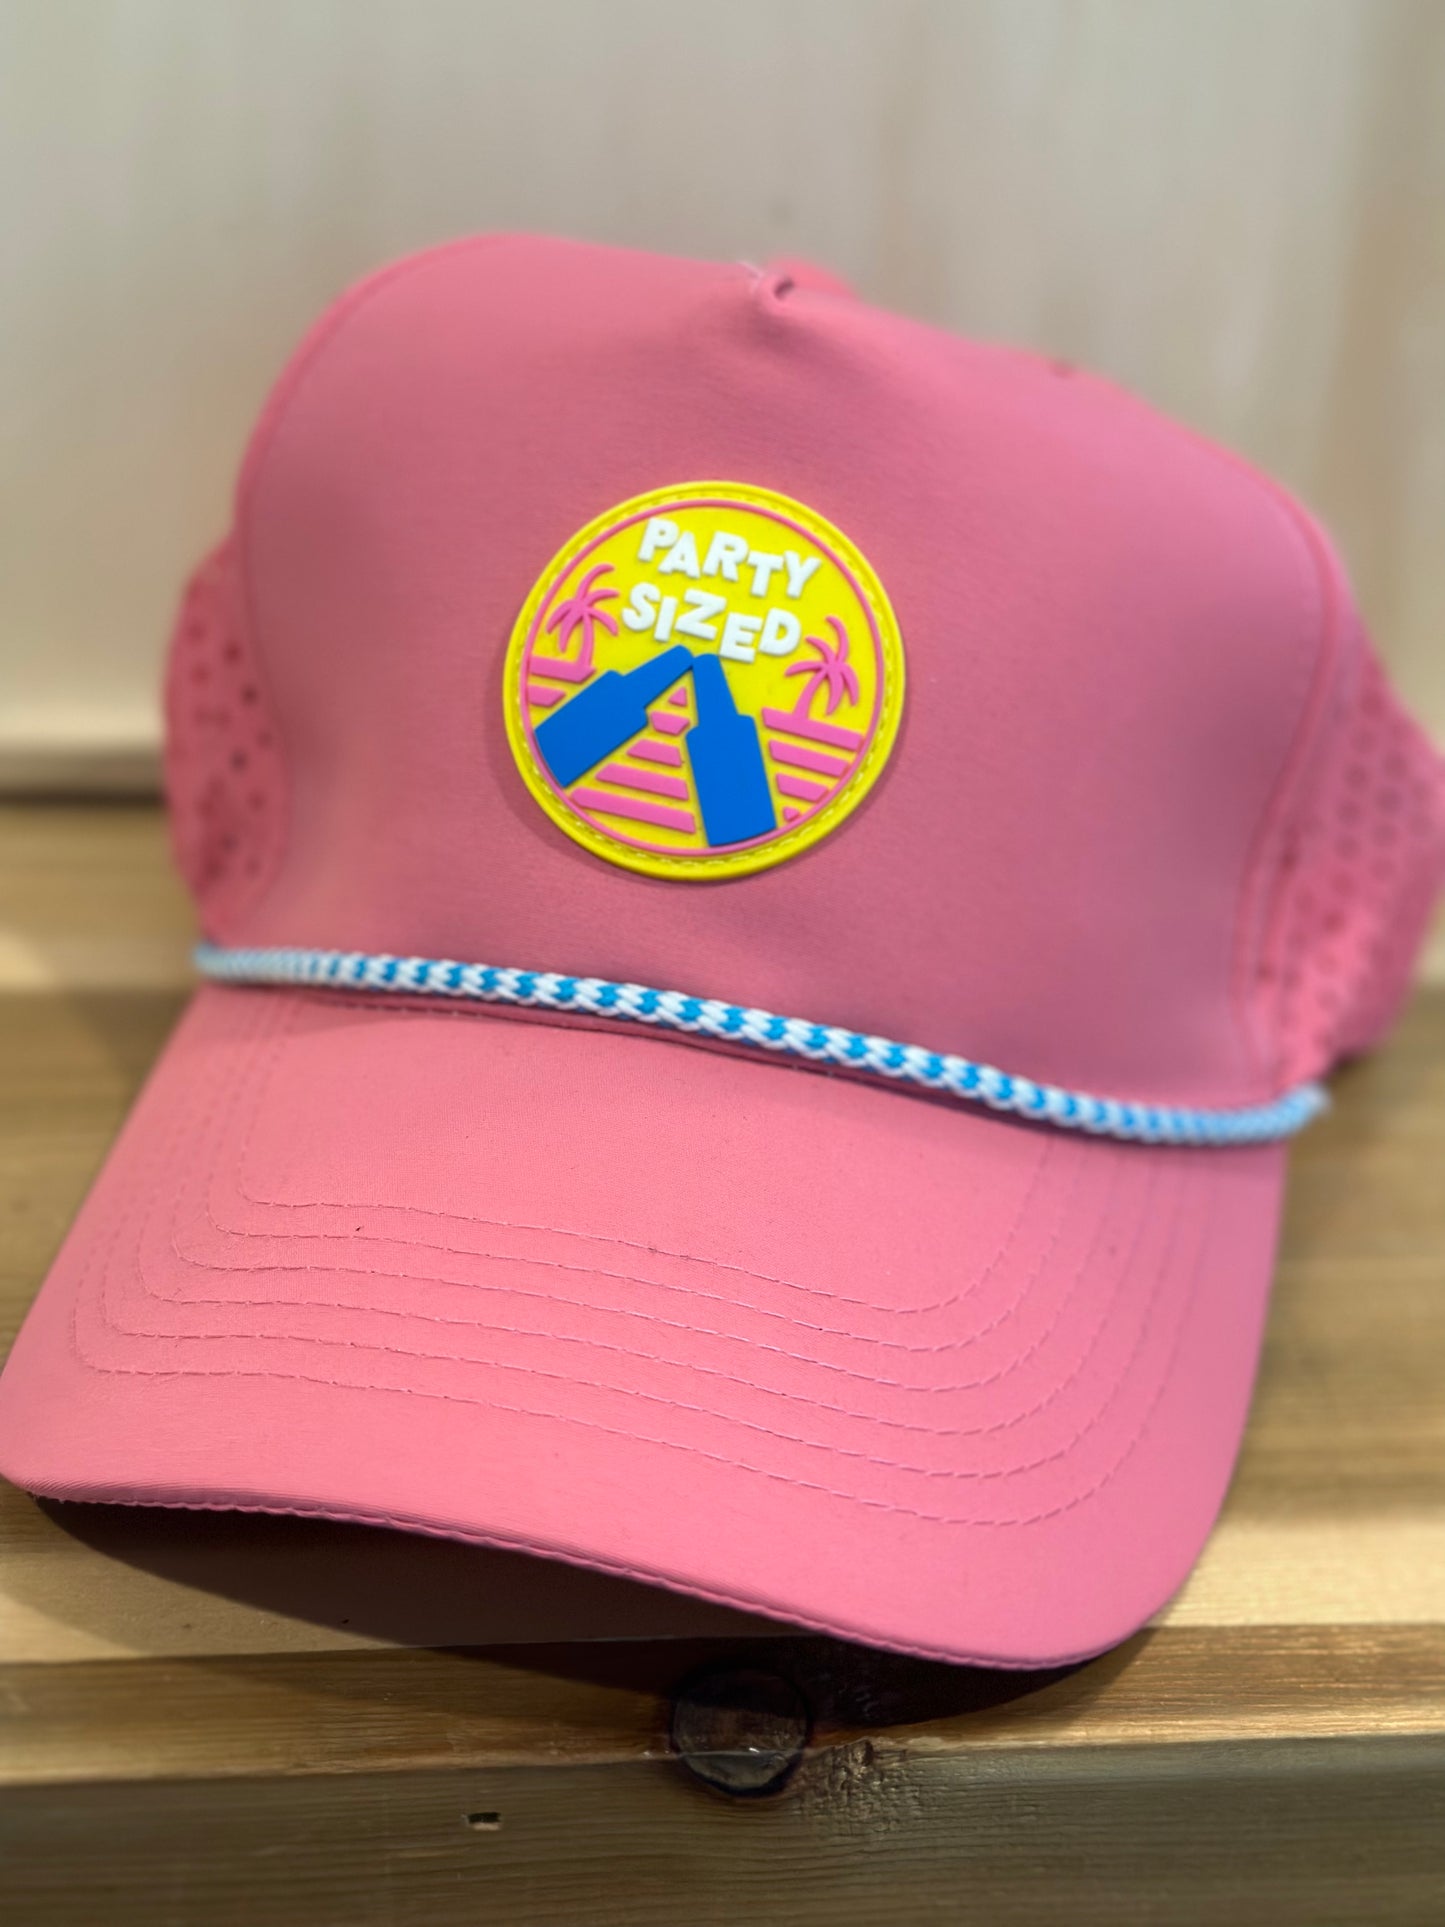 Party Sized Pink Hat